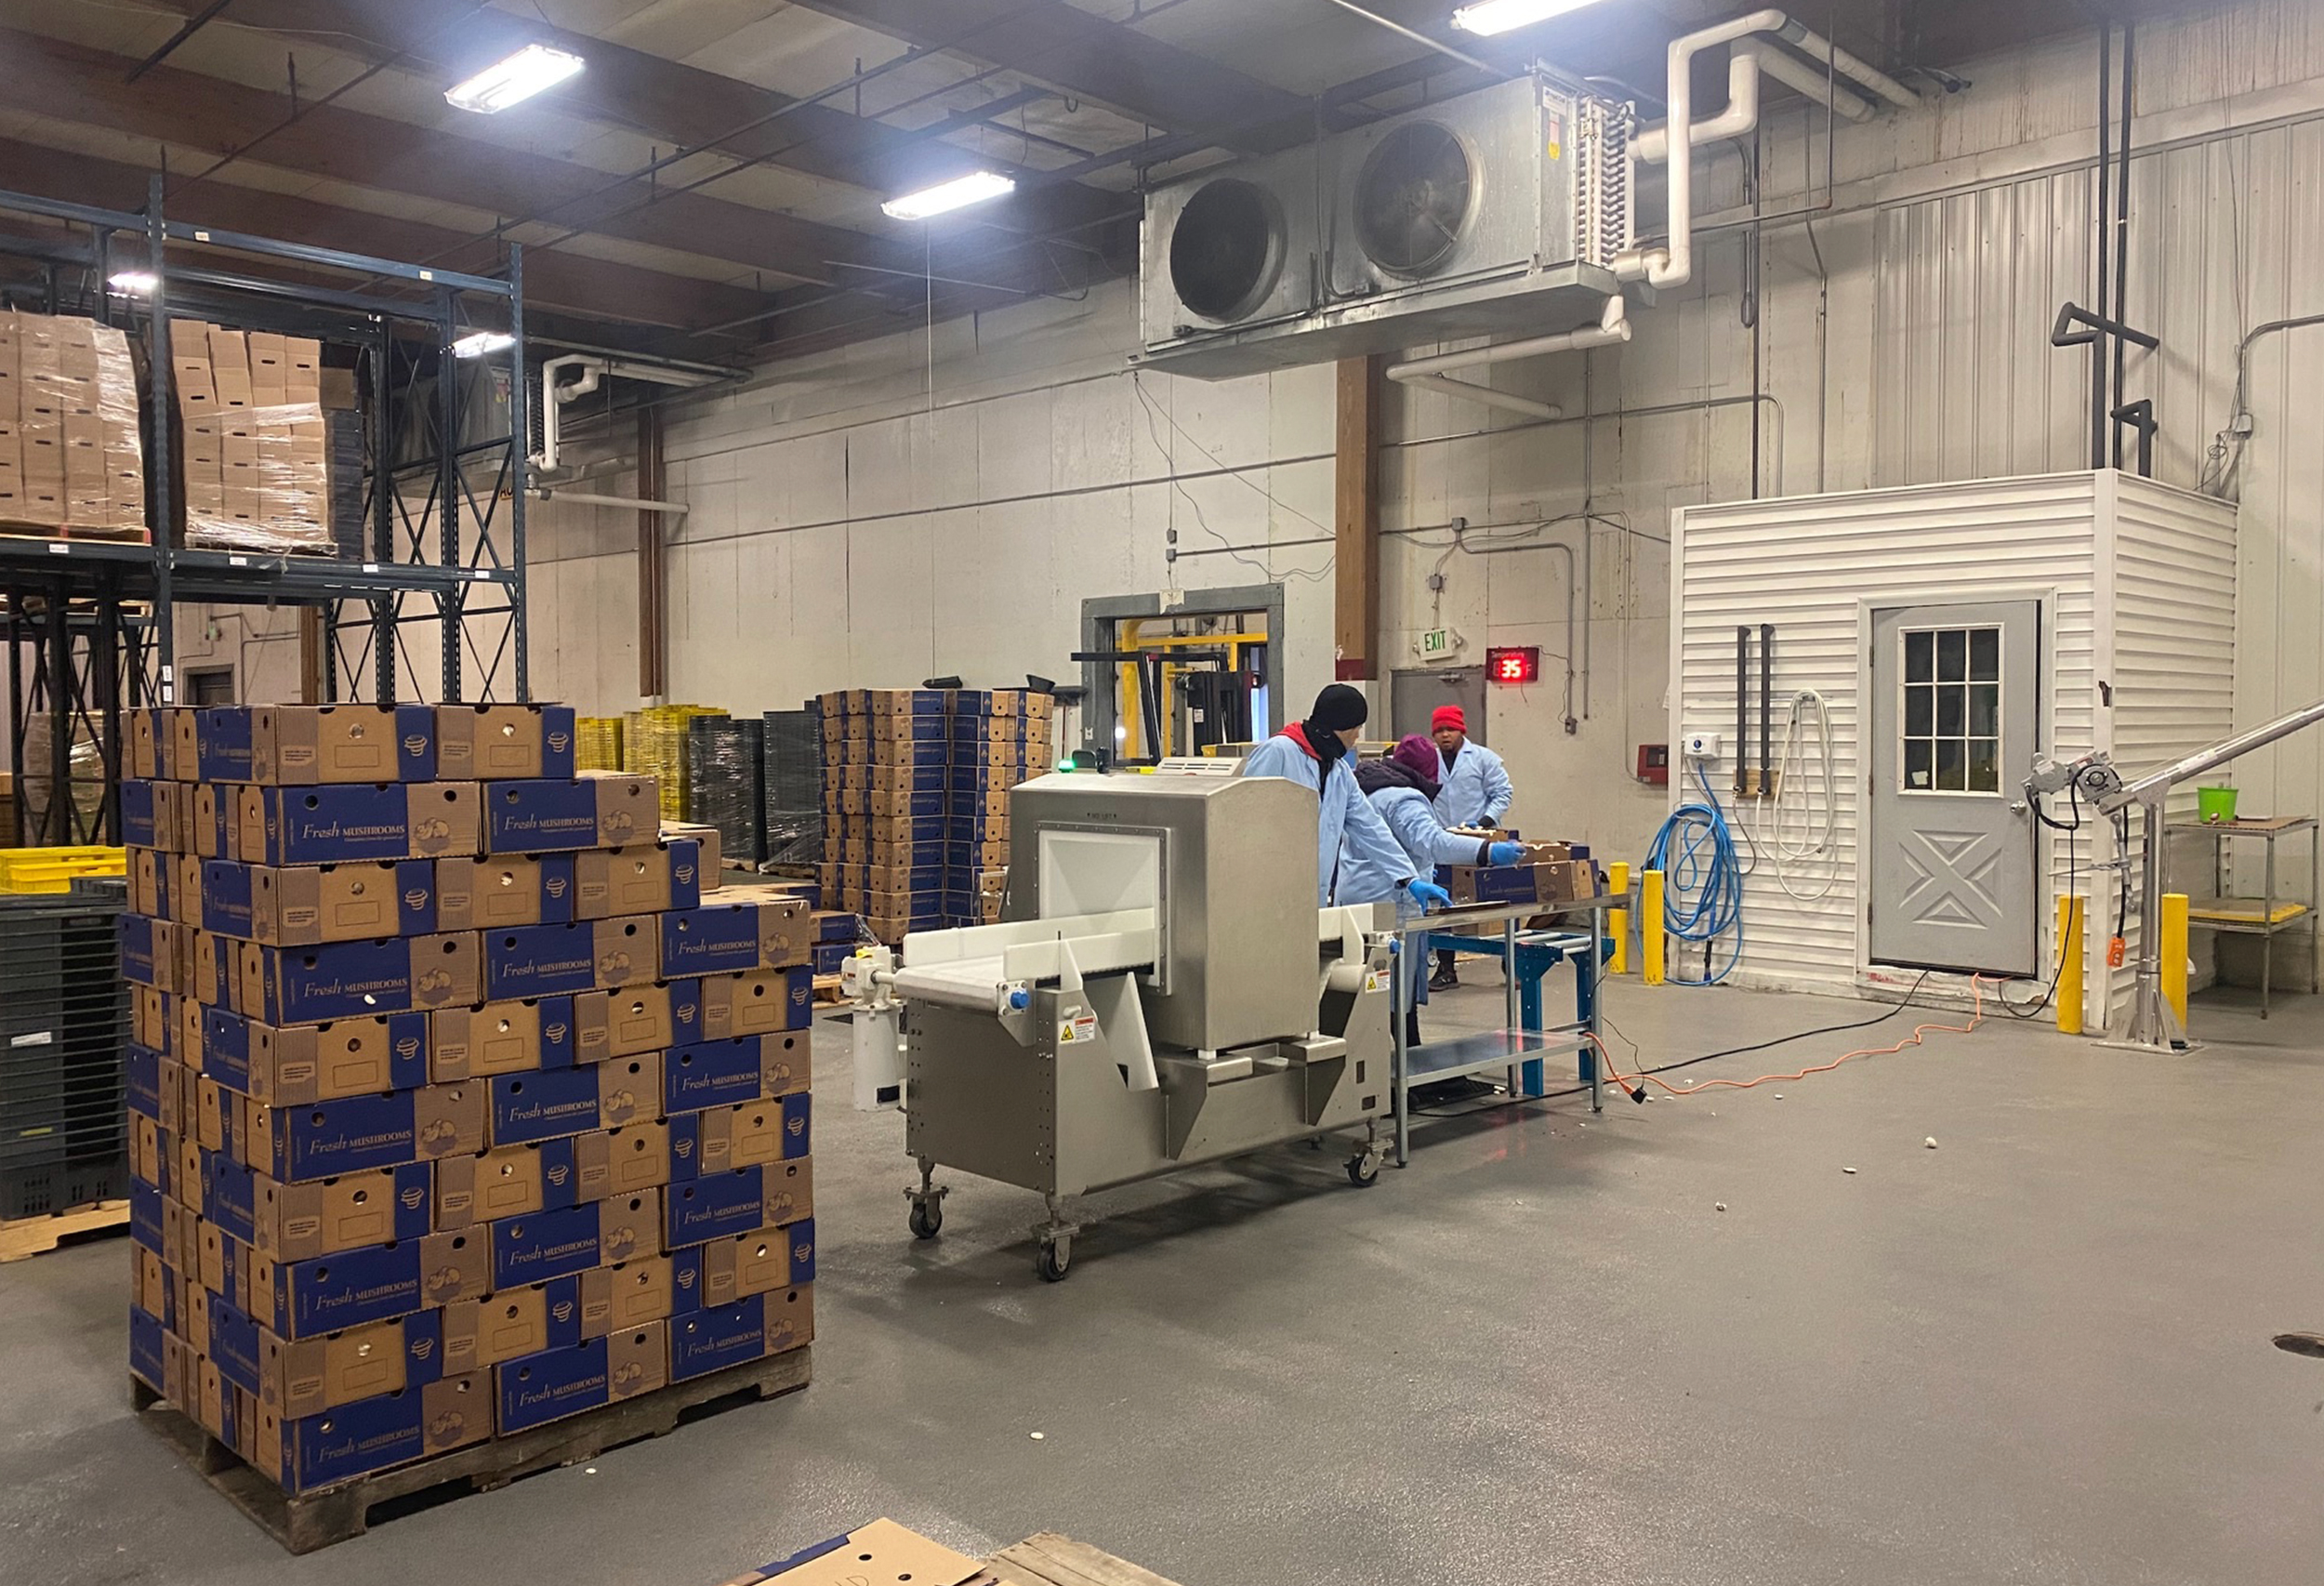 Workers packing boxes at the South Mill Indianapolis distribution center